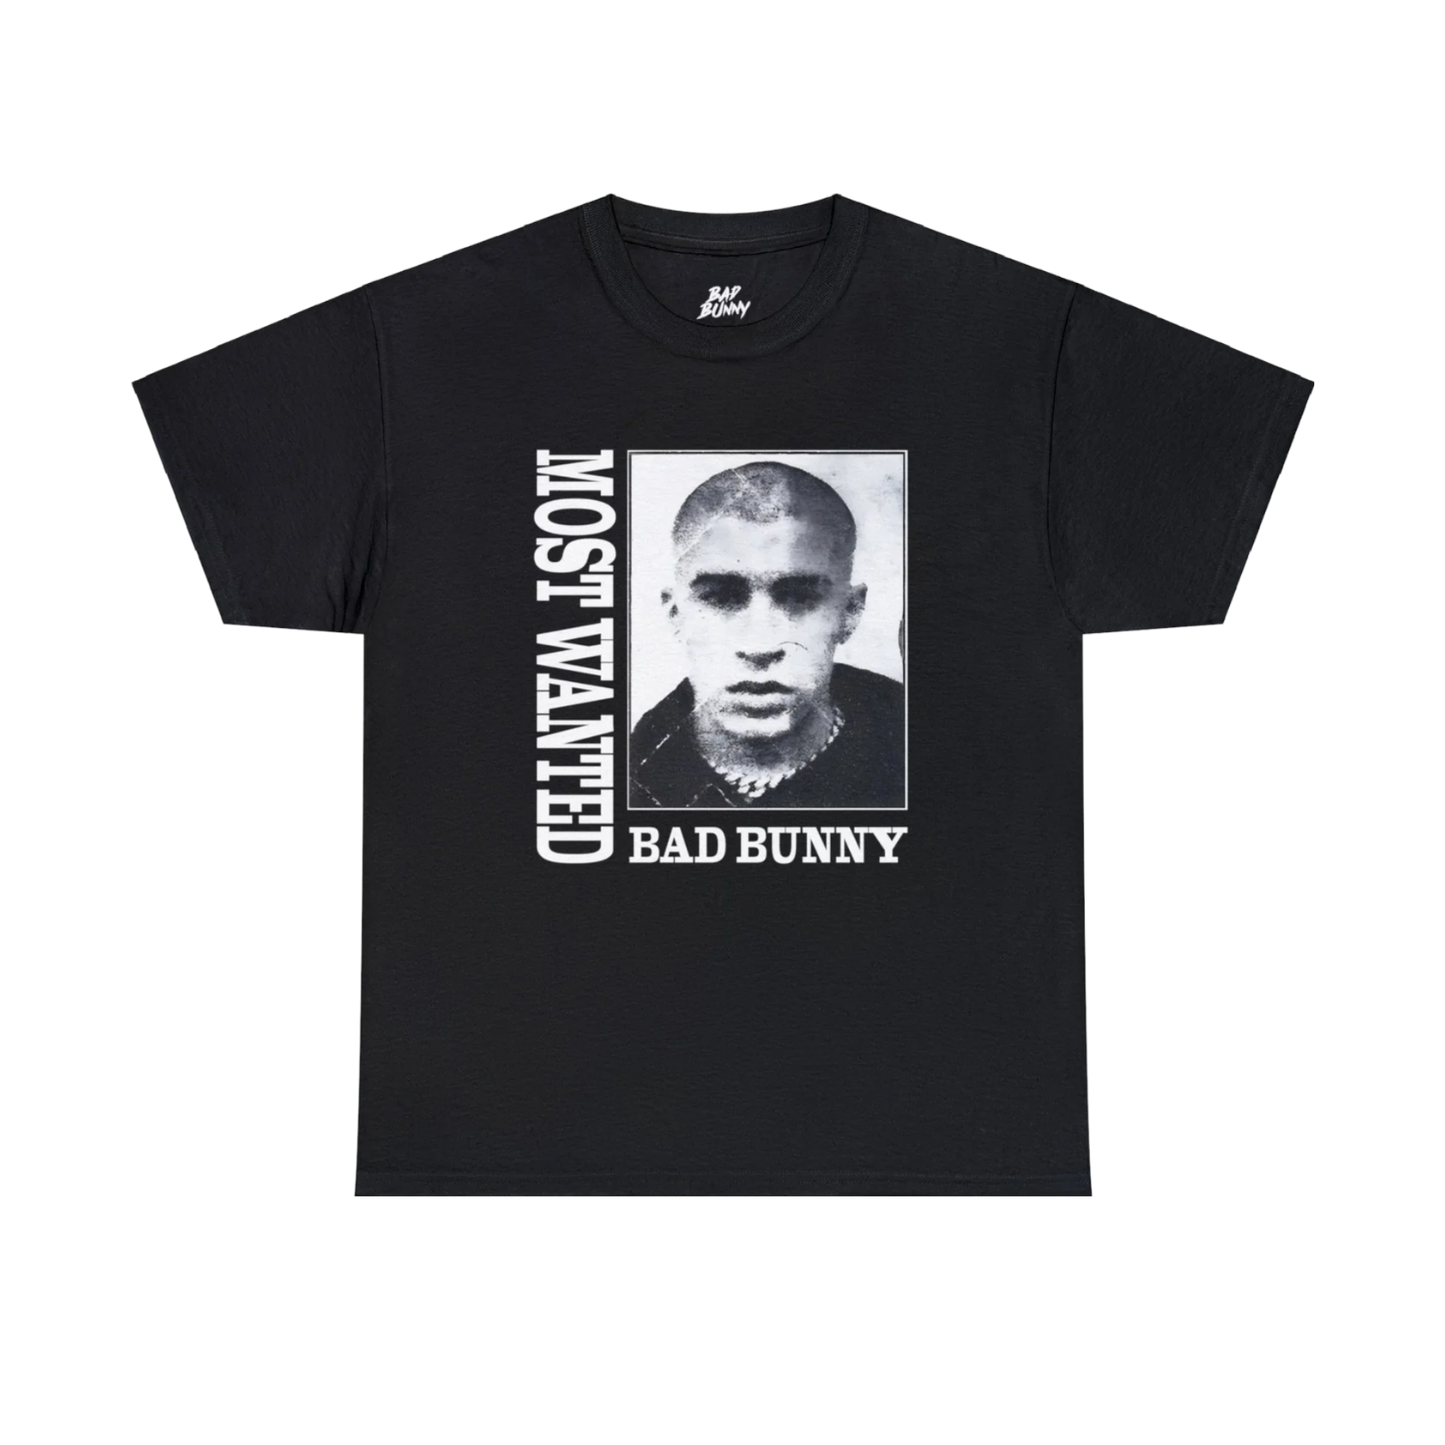 MOST WANTED TOUR - MOST WANTED TOUR DATES BLACK COTTON TEE